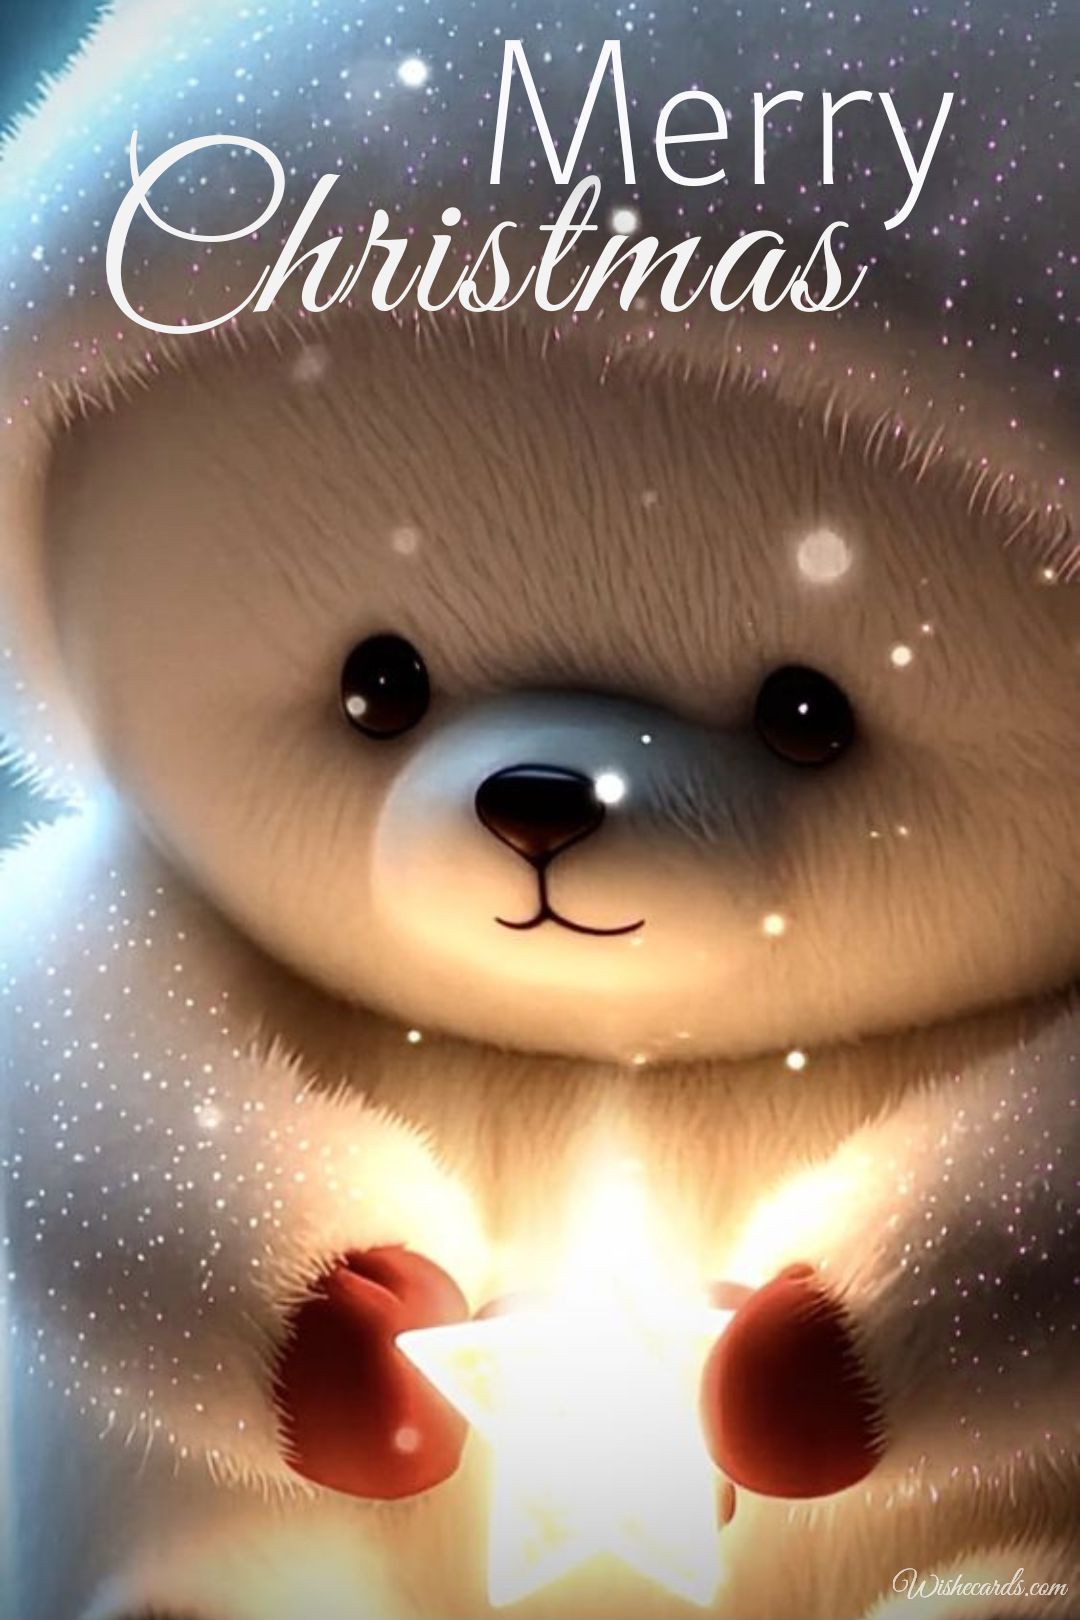 Christmas Ecard Personalized